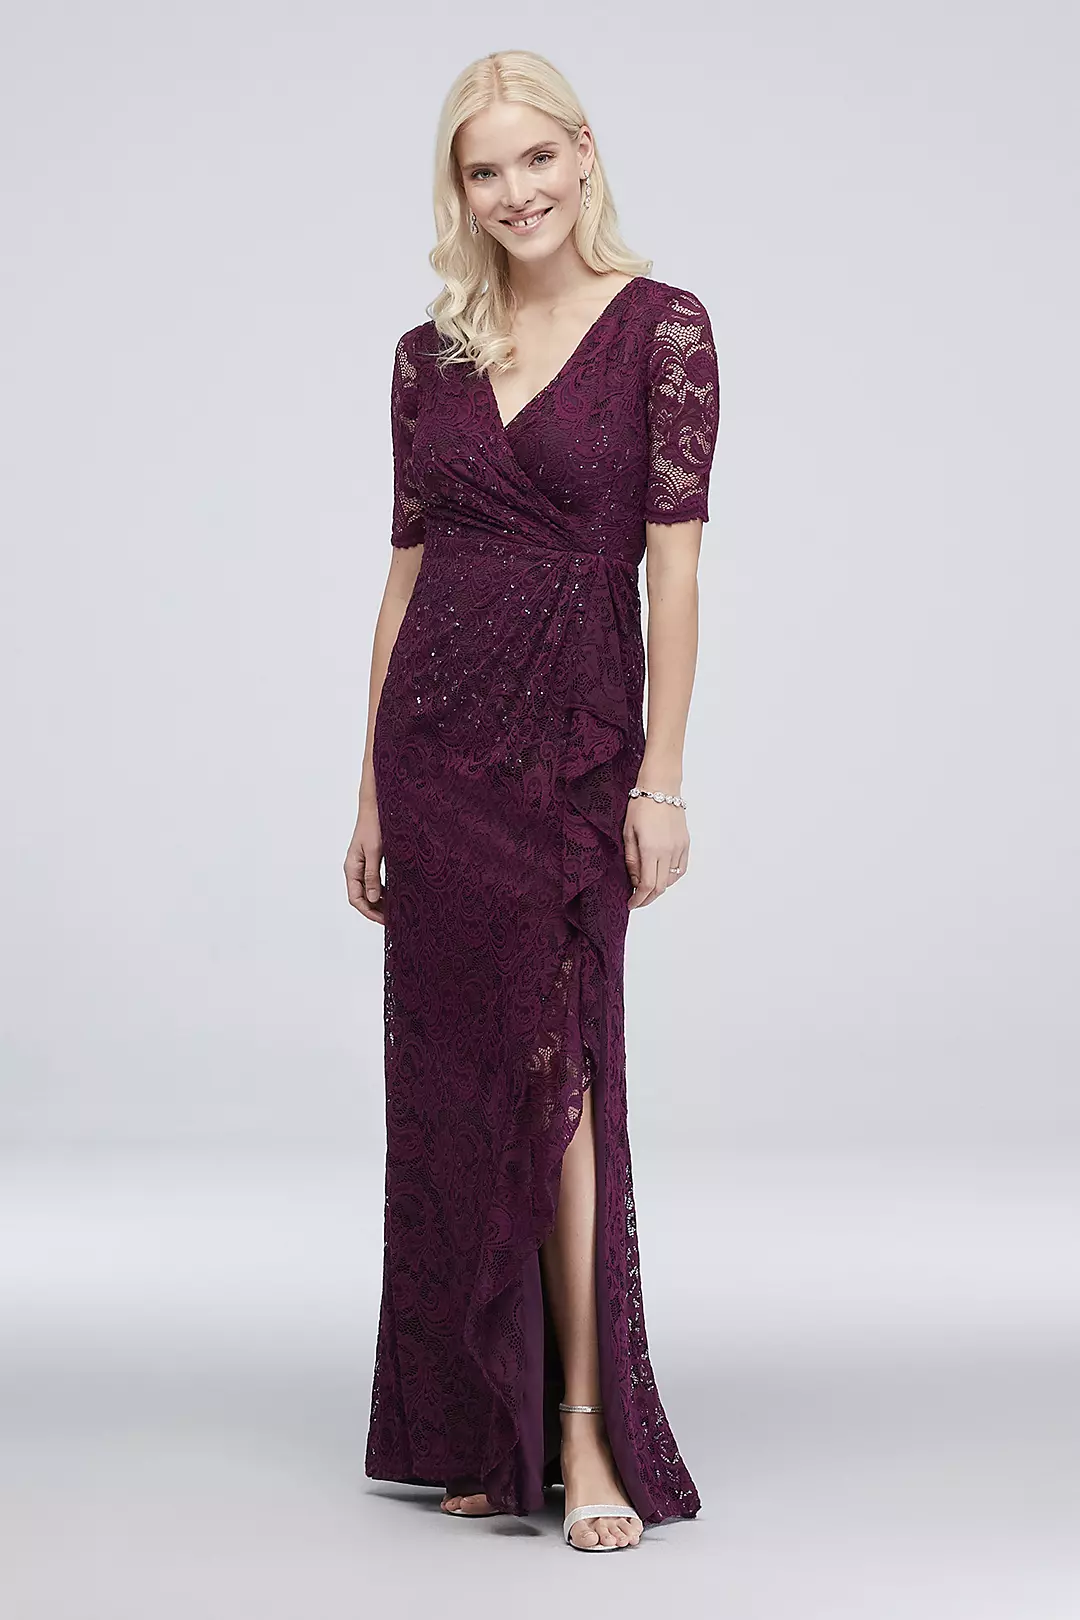 Sequin Lace 3/4 Sleeve Sheath Dress with Cascade Image